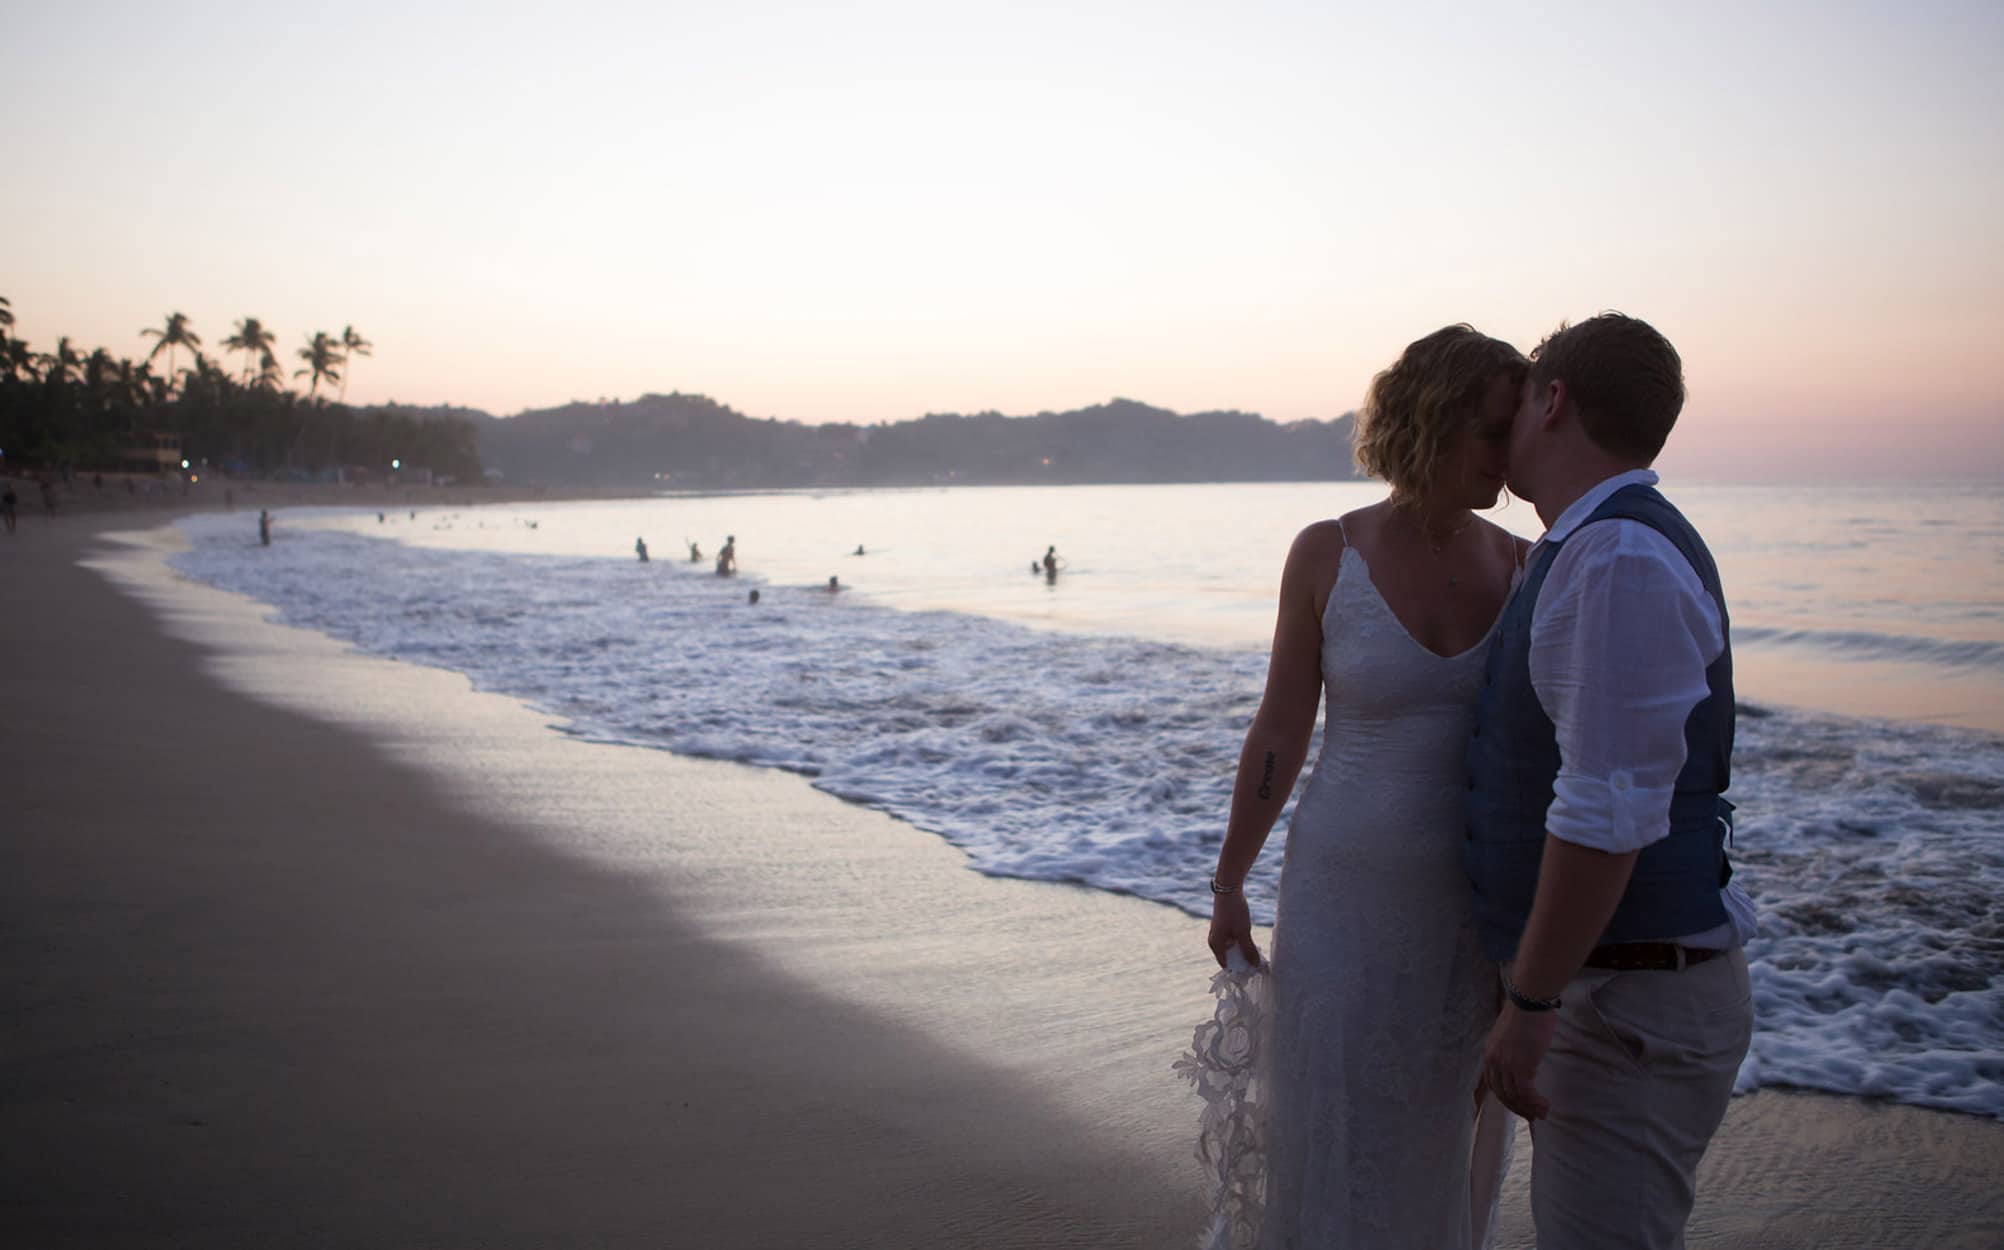 Our Mexican Wedding – Celebrating Our Marriage on the Beach